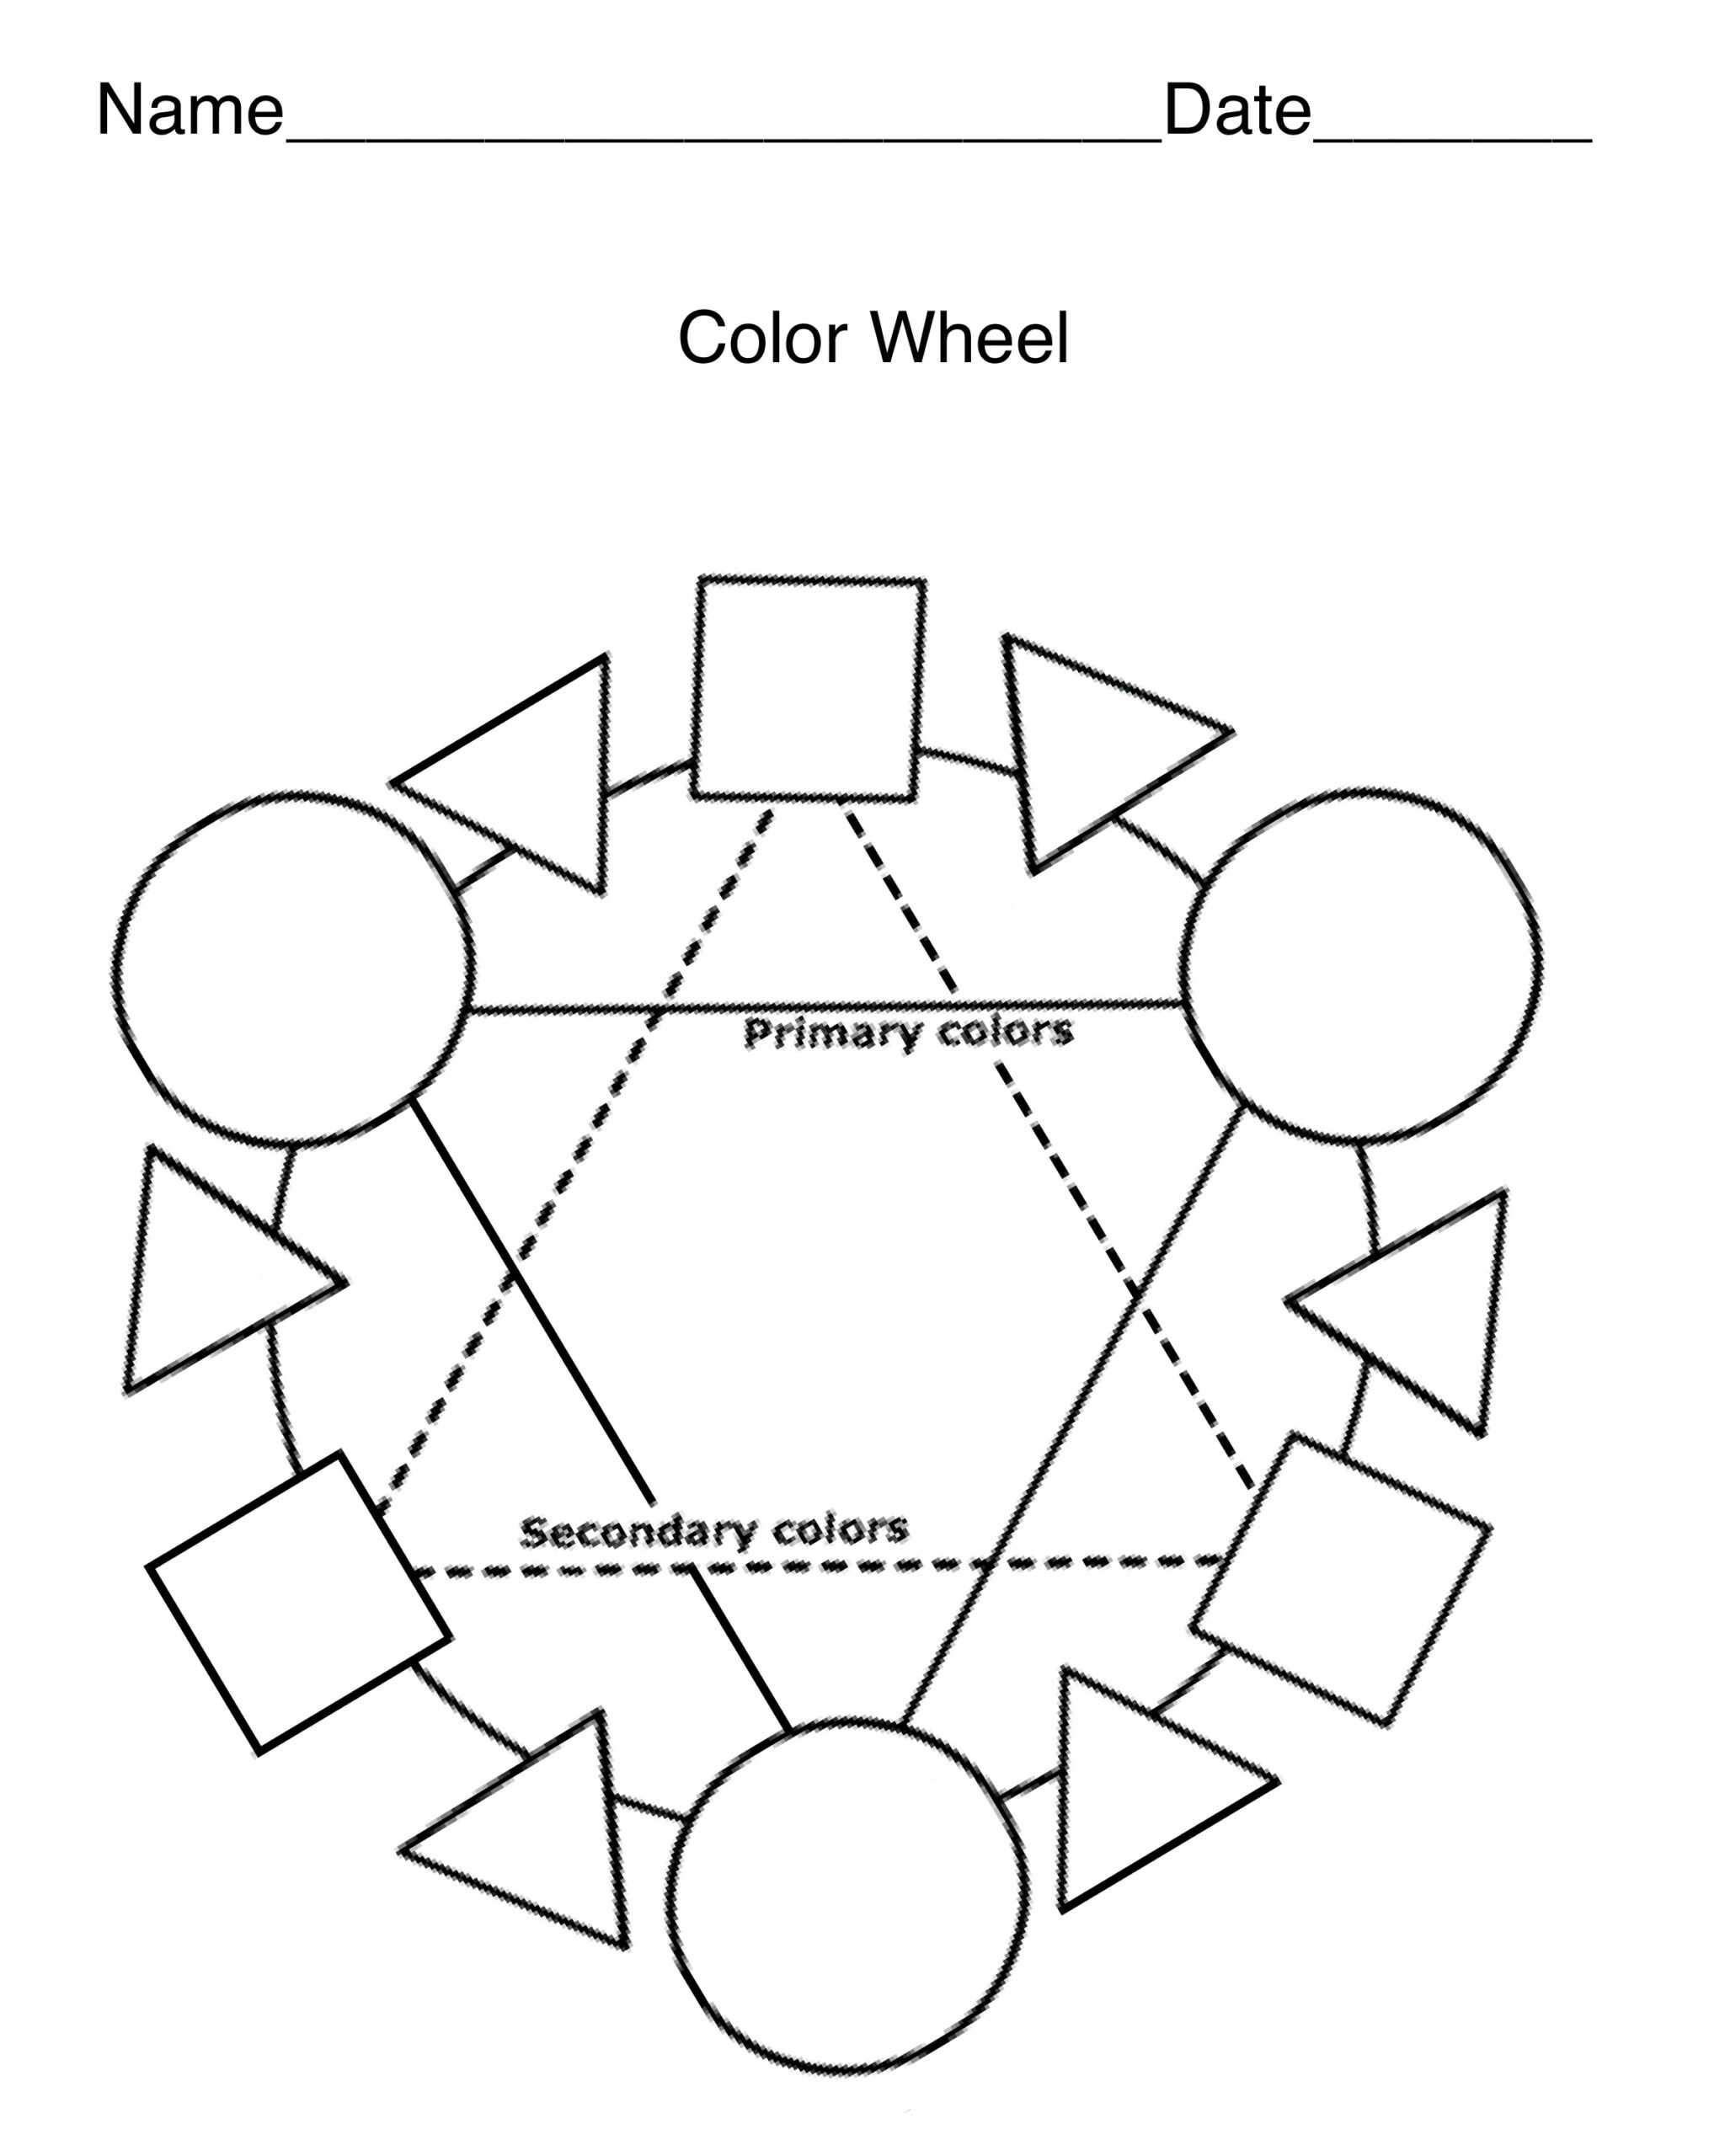 Blank Color Wheel Template. Tertiary Colors Blank Color Regarding Blank Color Wheel Template